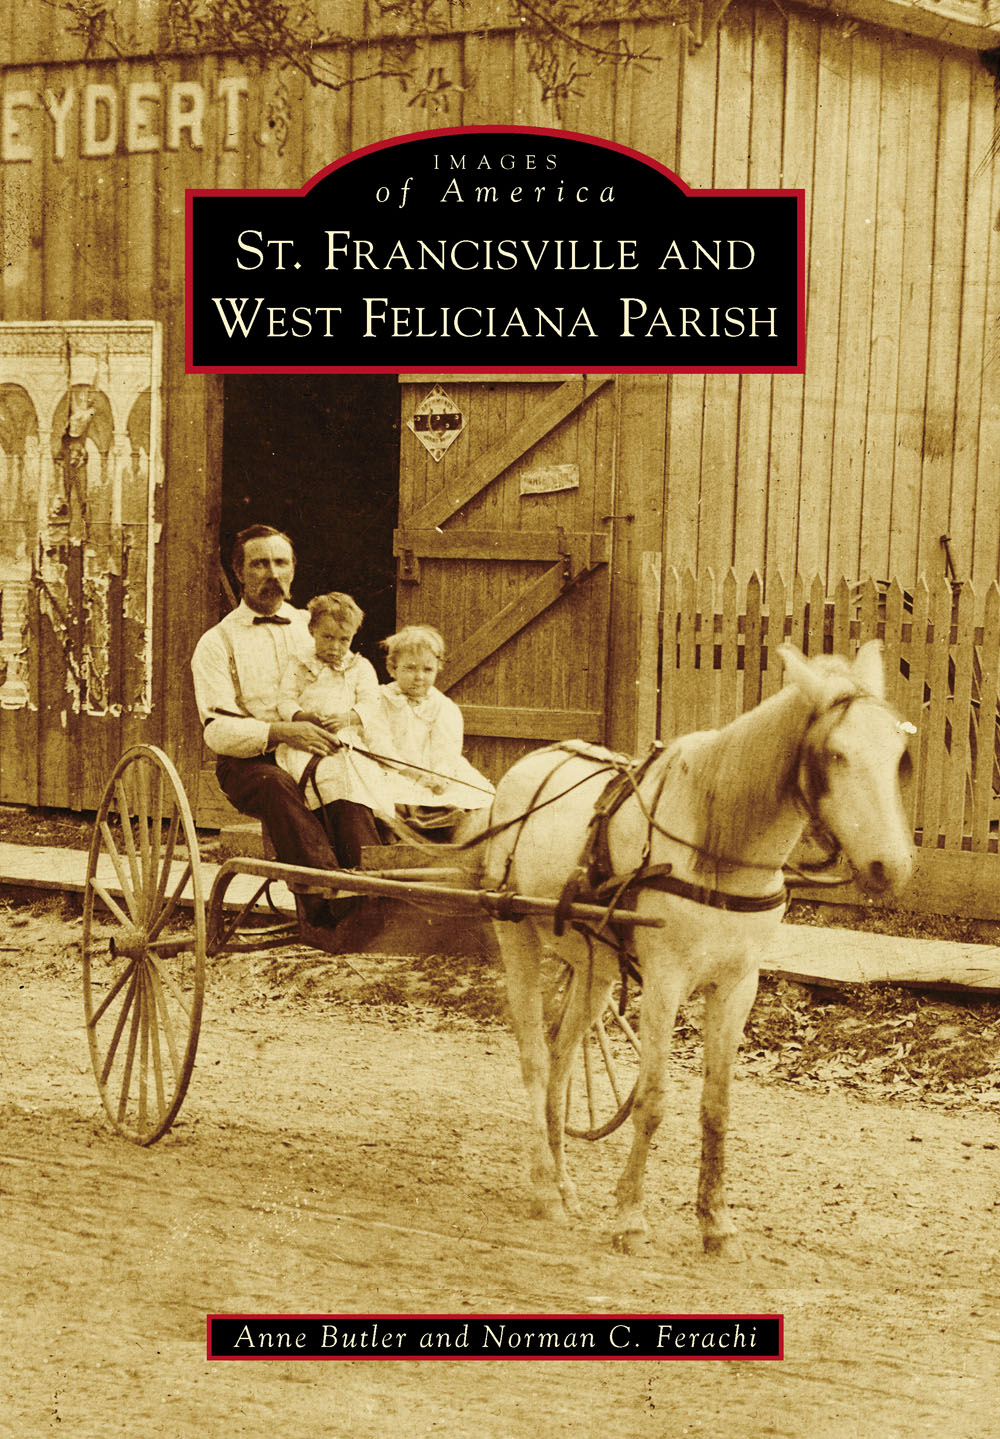 IMAGES of America ST FRANCISVILLE AND WEST FELICIANA PARISH Founded in - photo 1